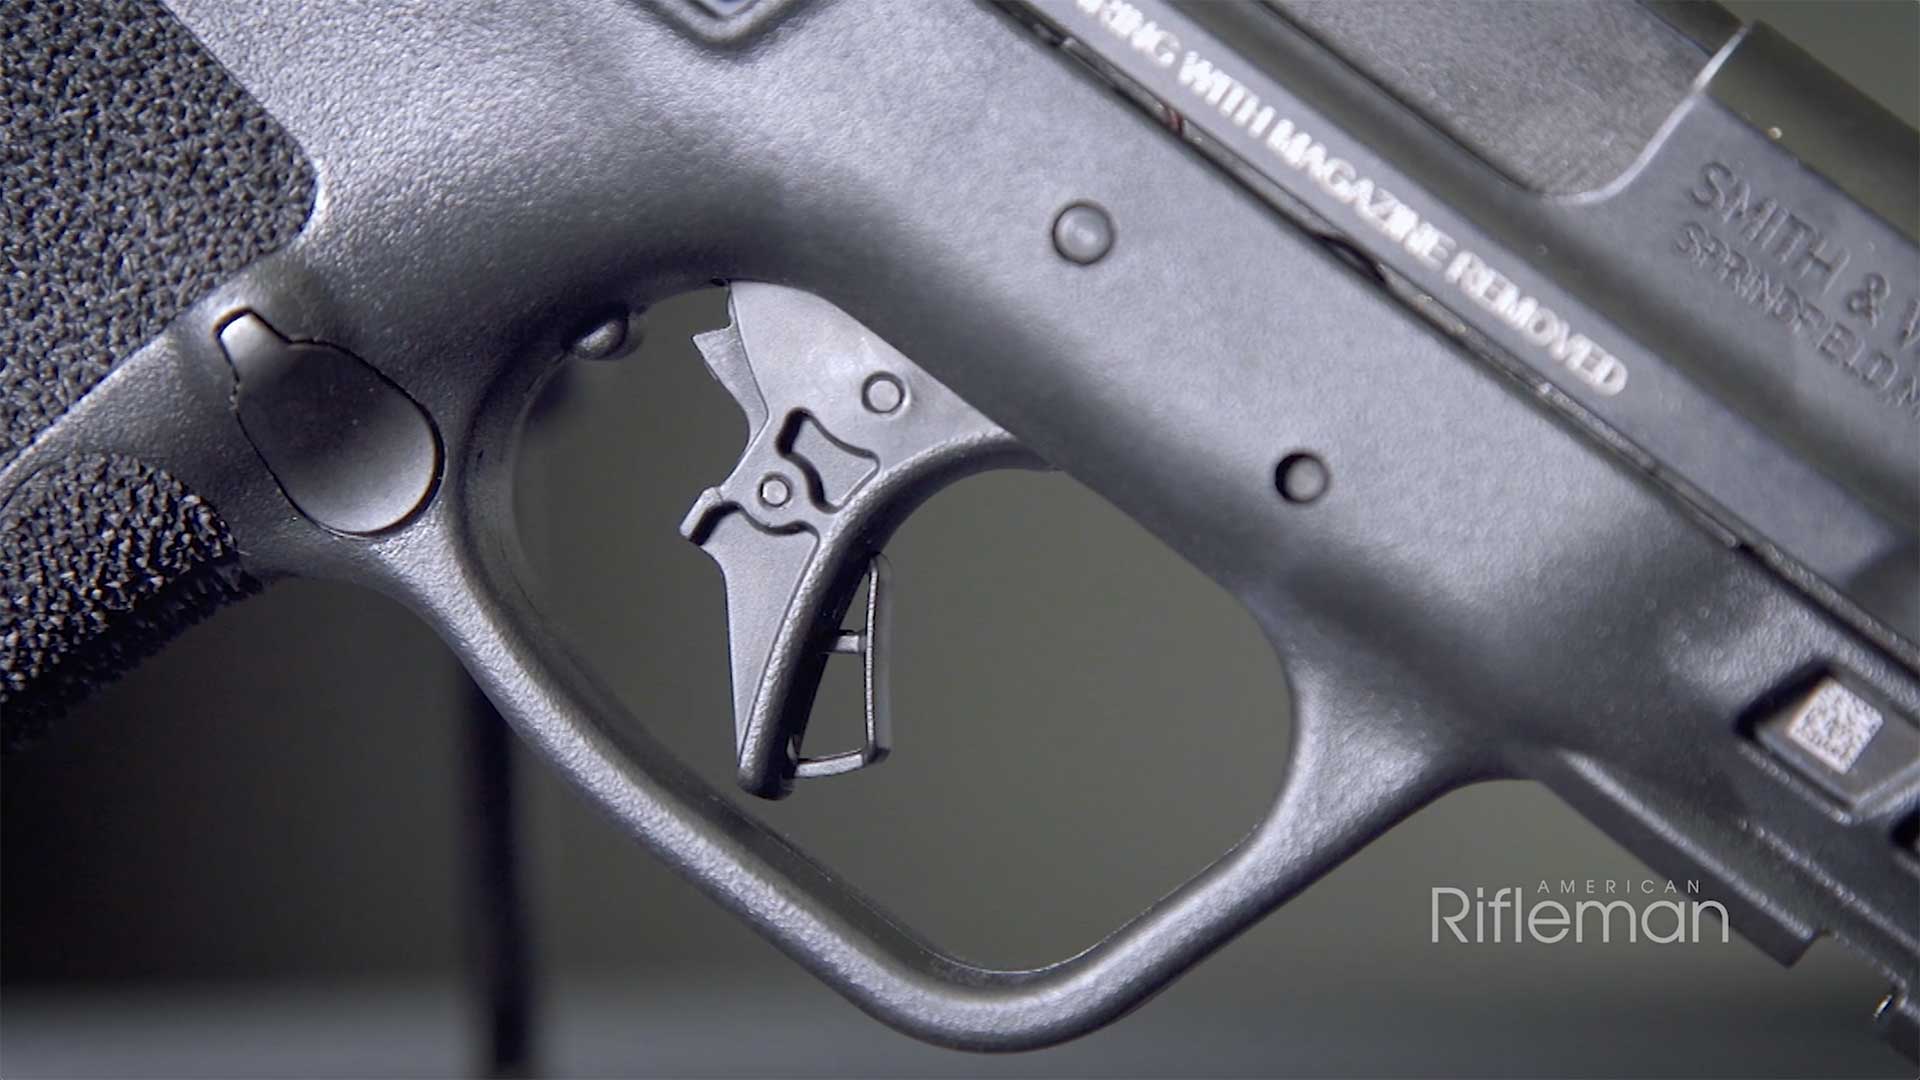 The blade-in-shoe trigger design within the trigger guard of the M&P 10mm M2.0.